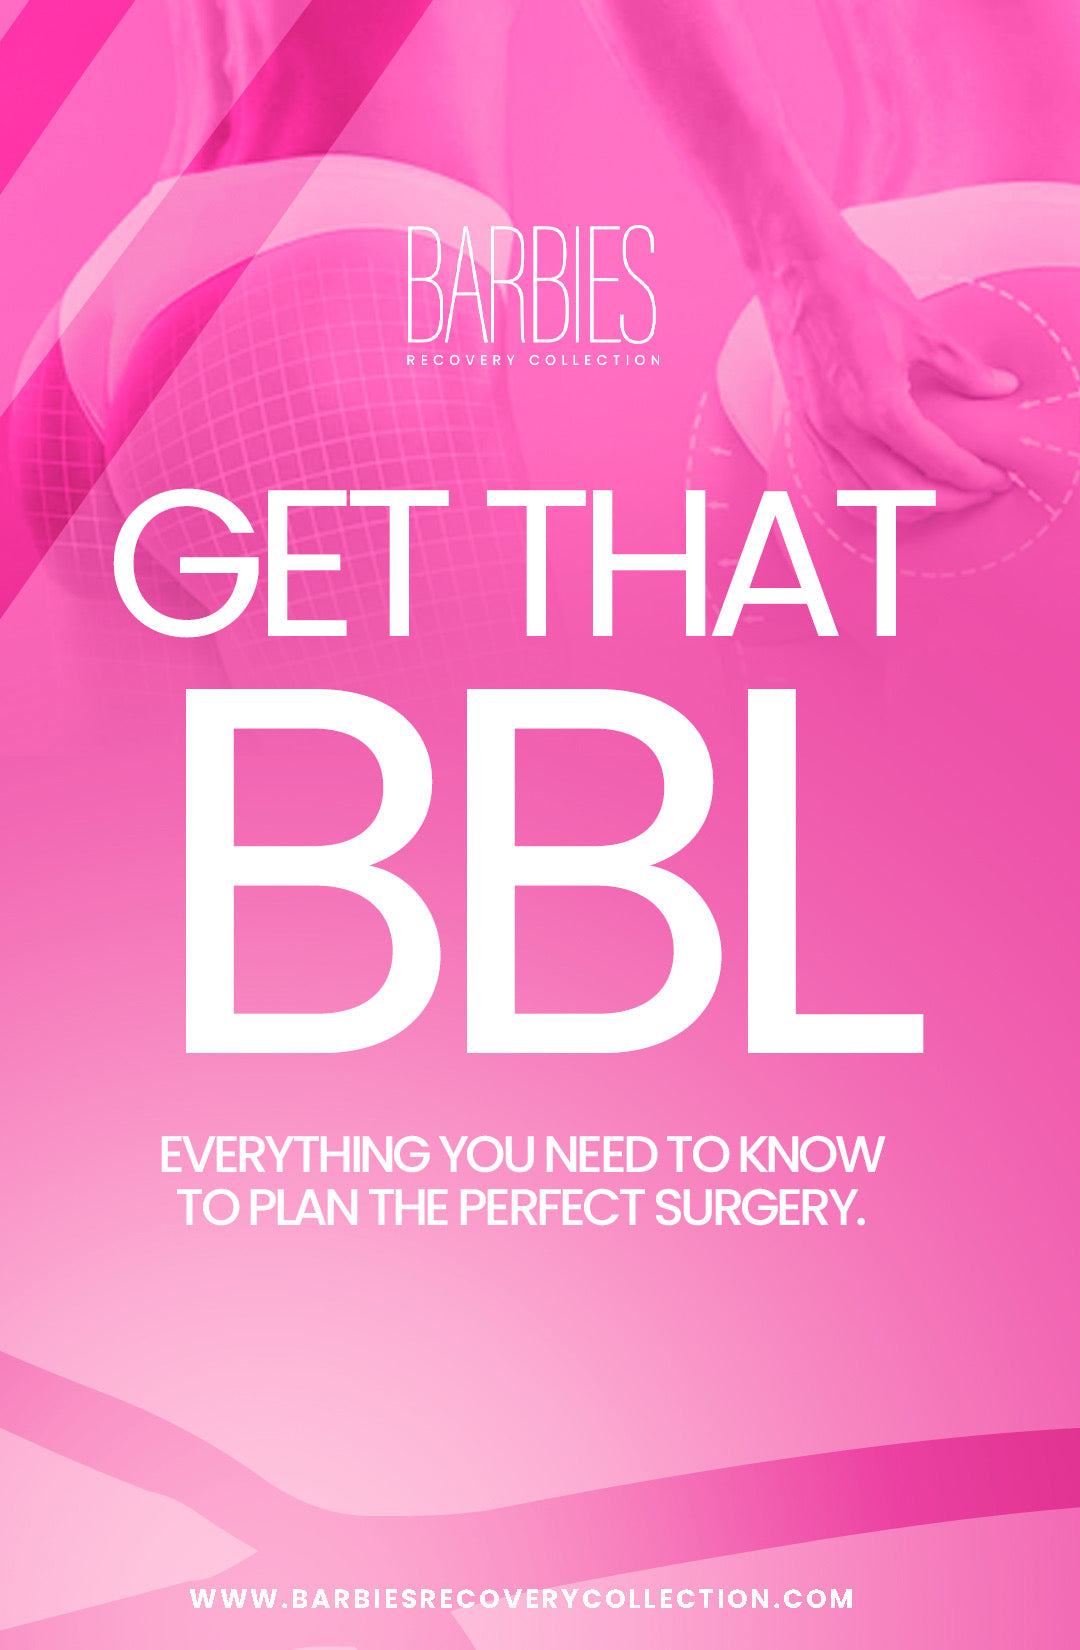 Bundled with BBL Post Surgery Supplies - Complete BBL Recovery Pack